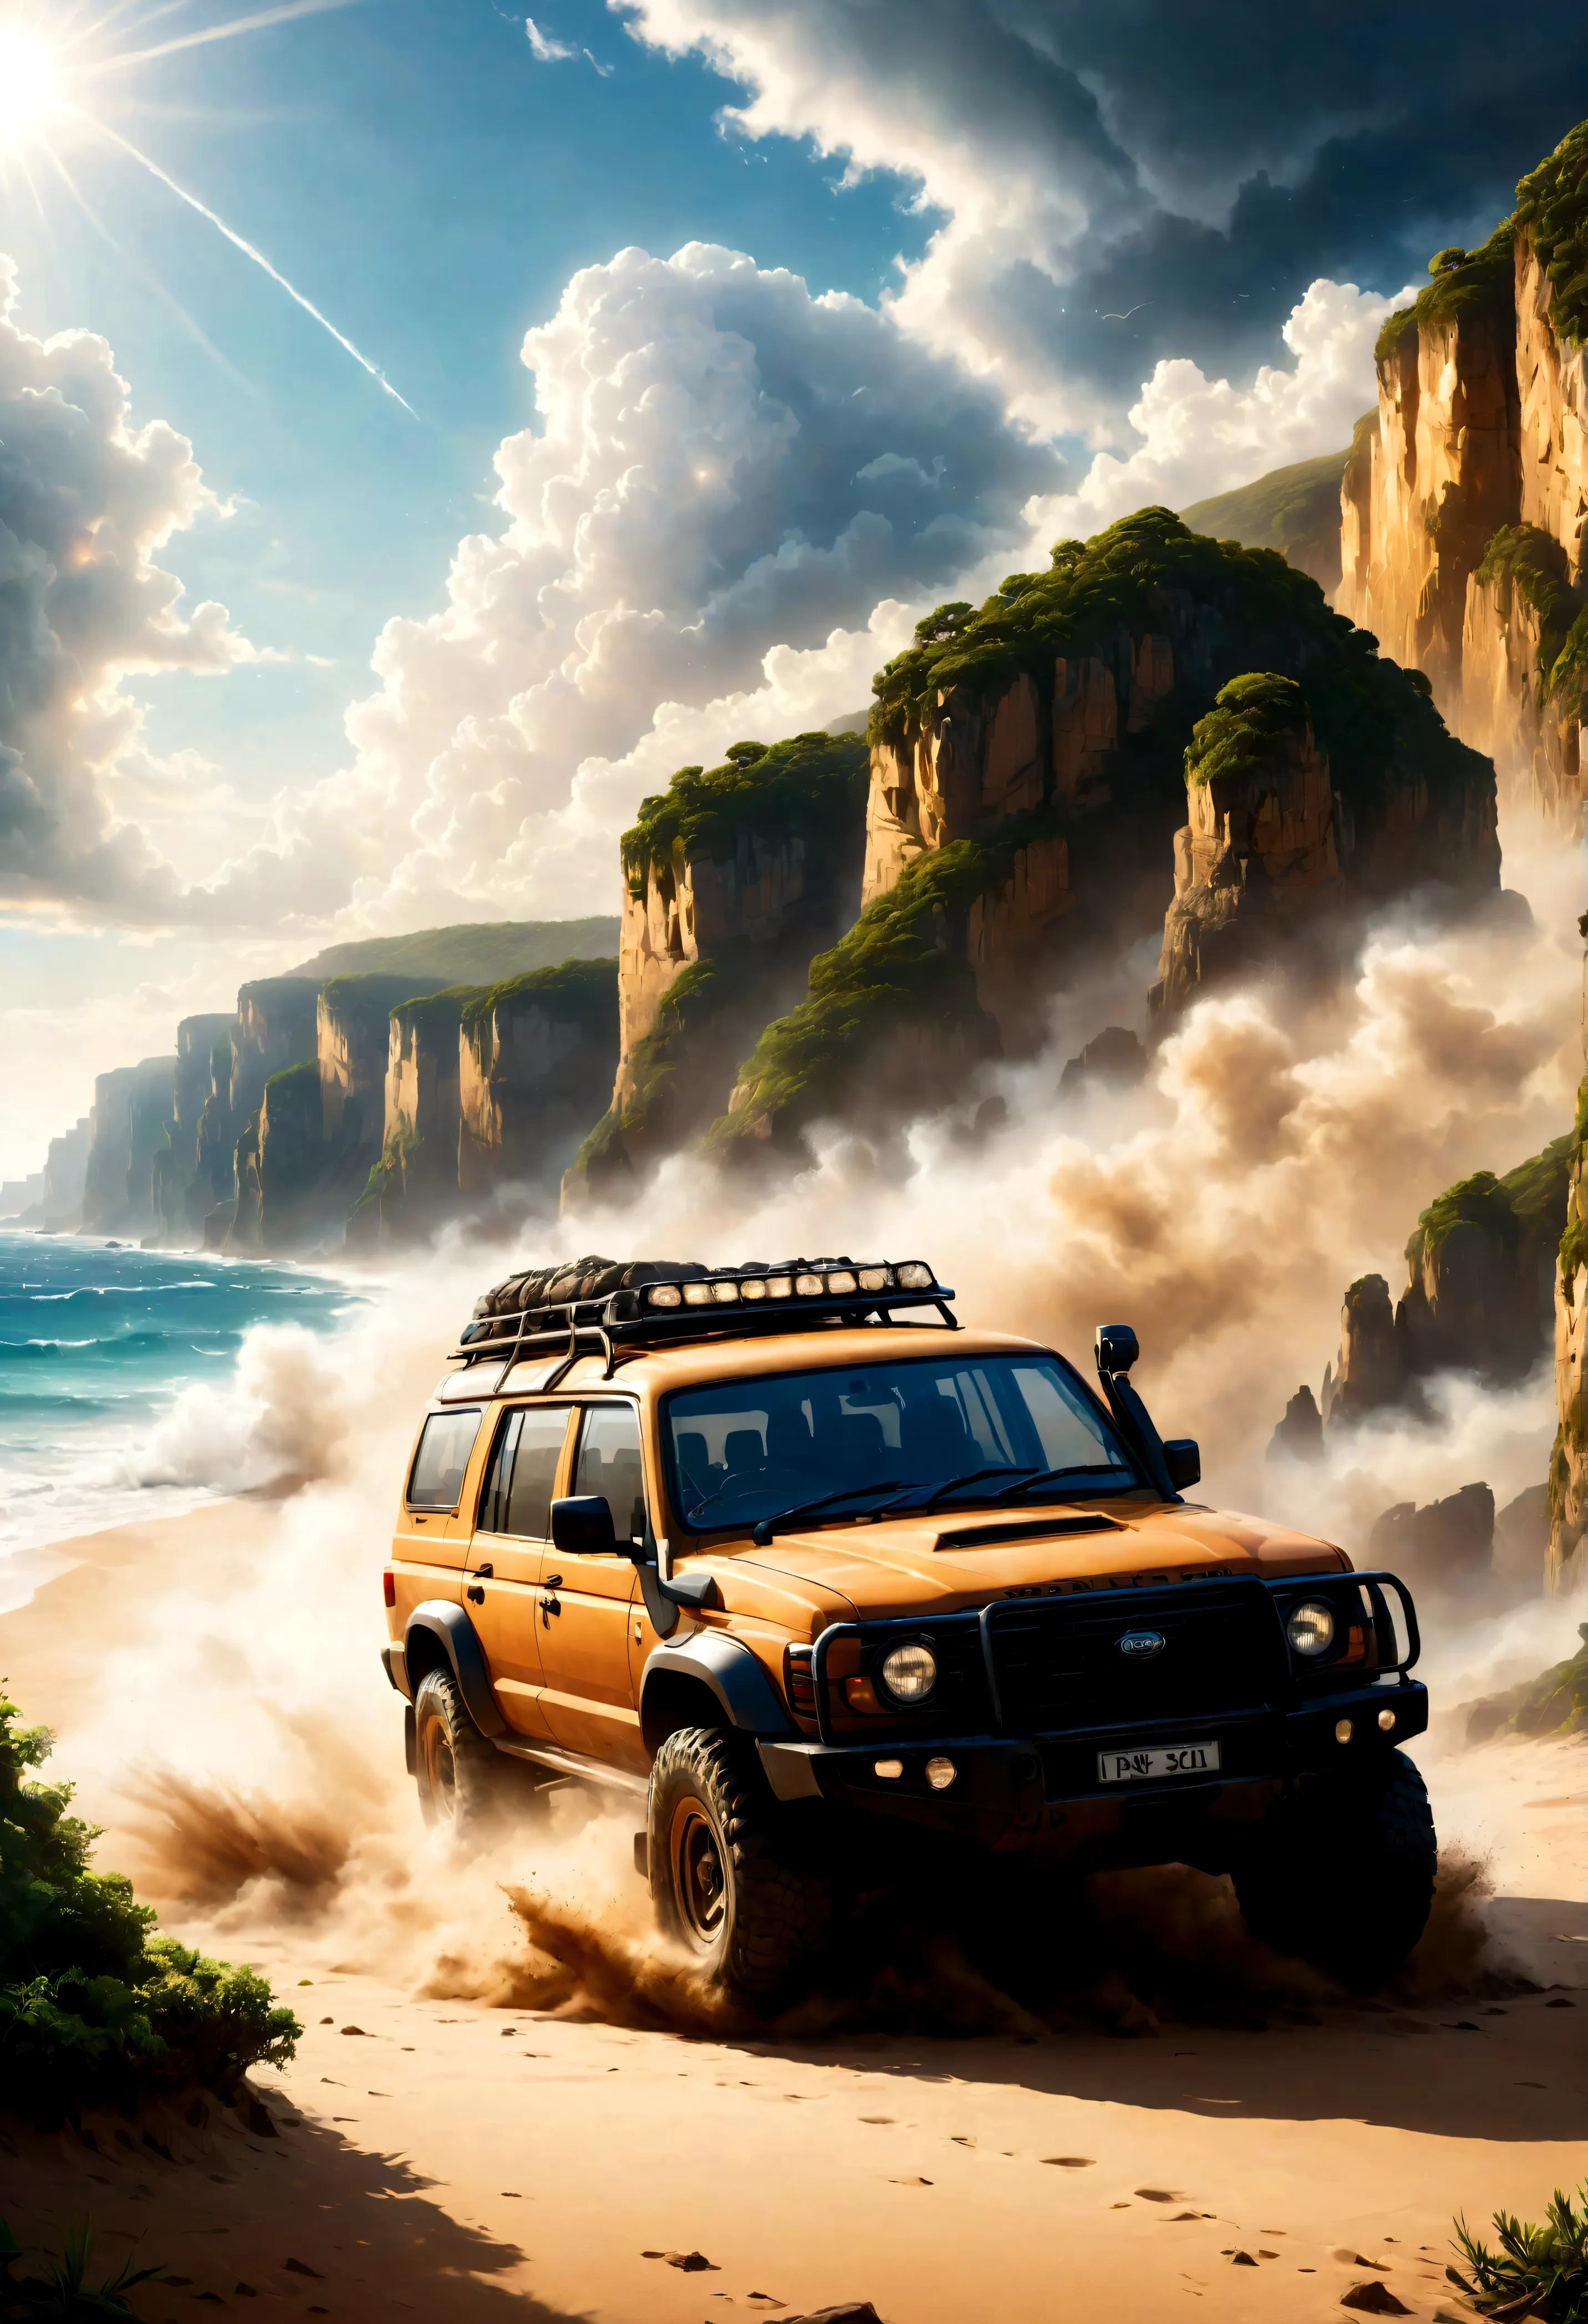 Illustration of a 4WD vehicle speeding along a beach with a series of high cliffs, with a cloud of dust.